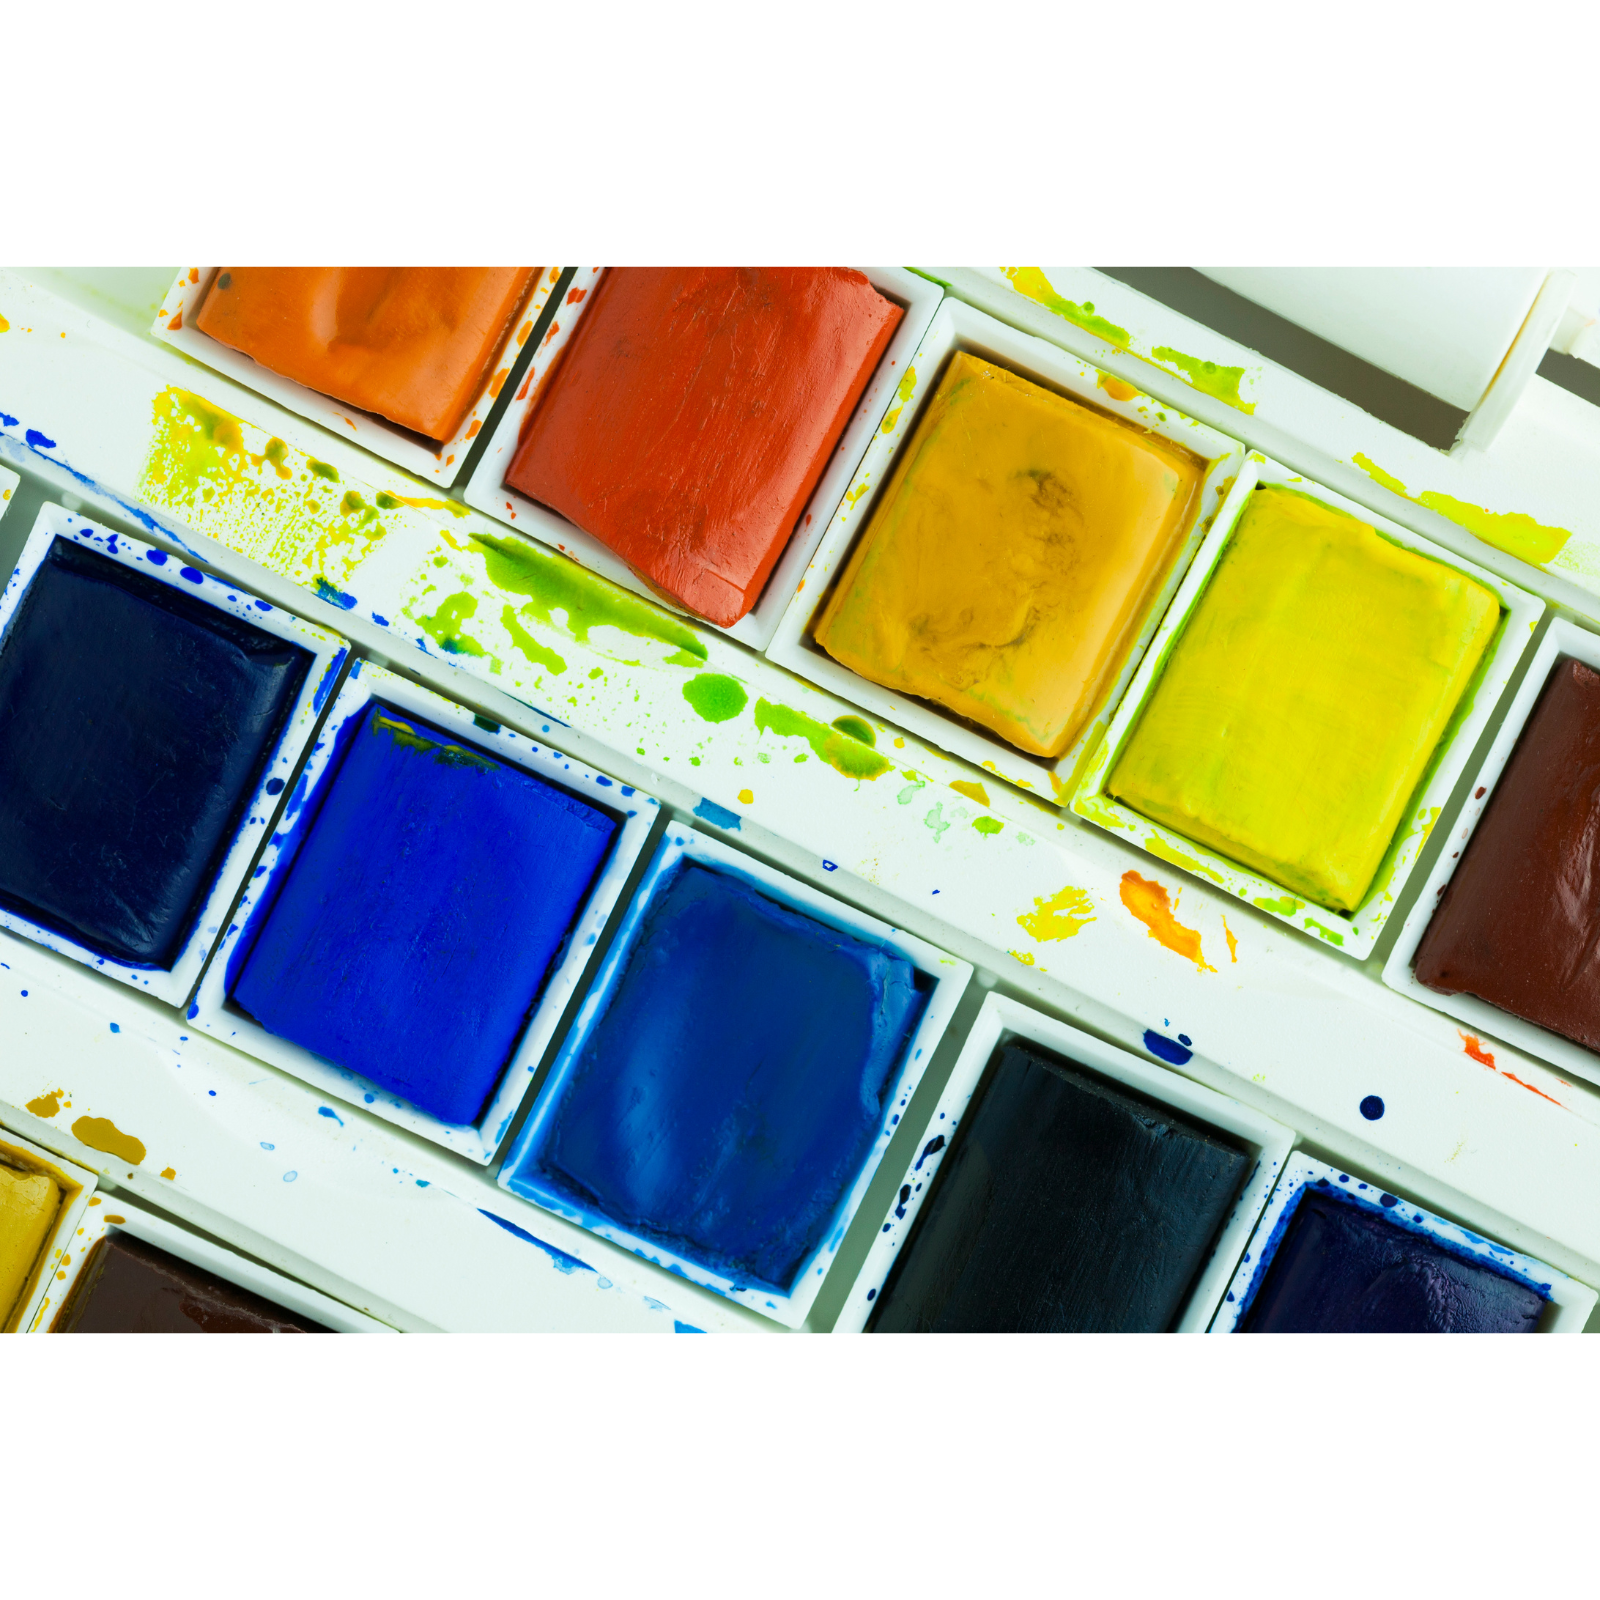 Winsor & Newton Cotman Watercolours Set Half Pans & Whole Pans - Affordable but uncompromising in quality